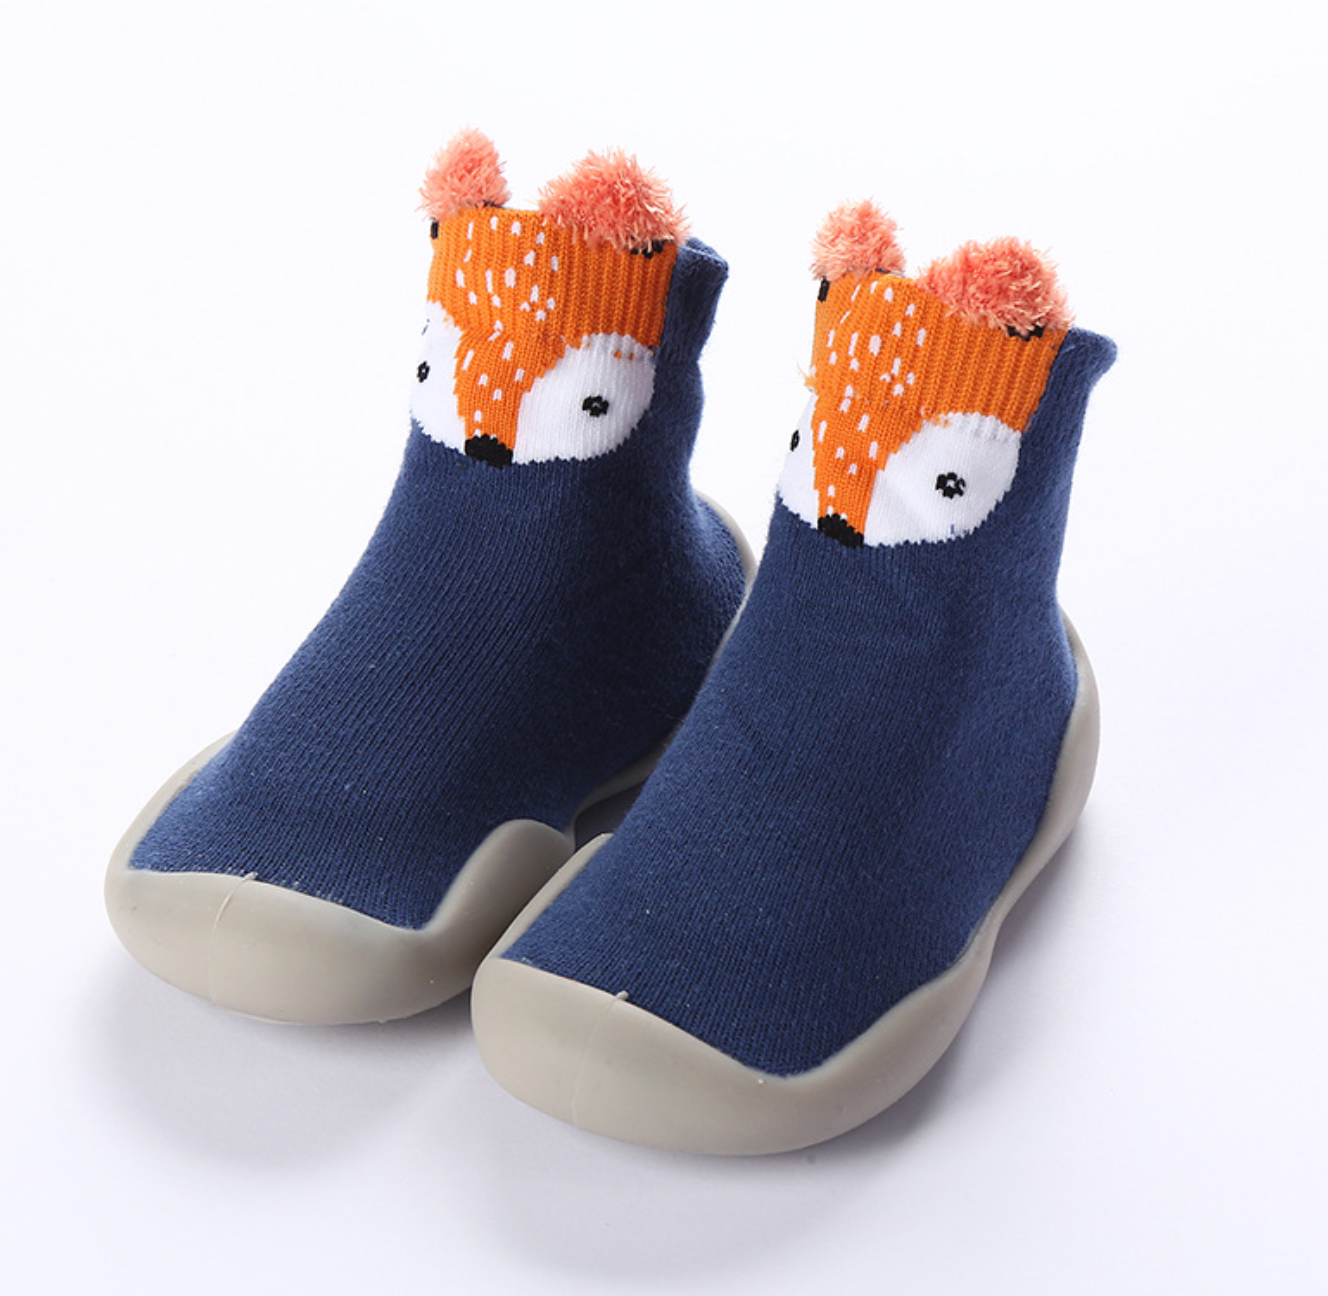 Anti-Skid Baby/Toddler Shoes Socks - Fox in Blue (6-36 months) - Taylorson